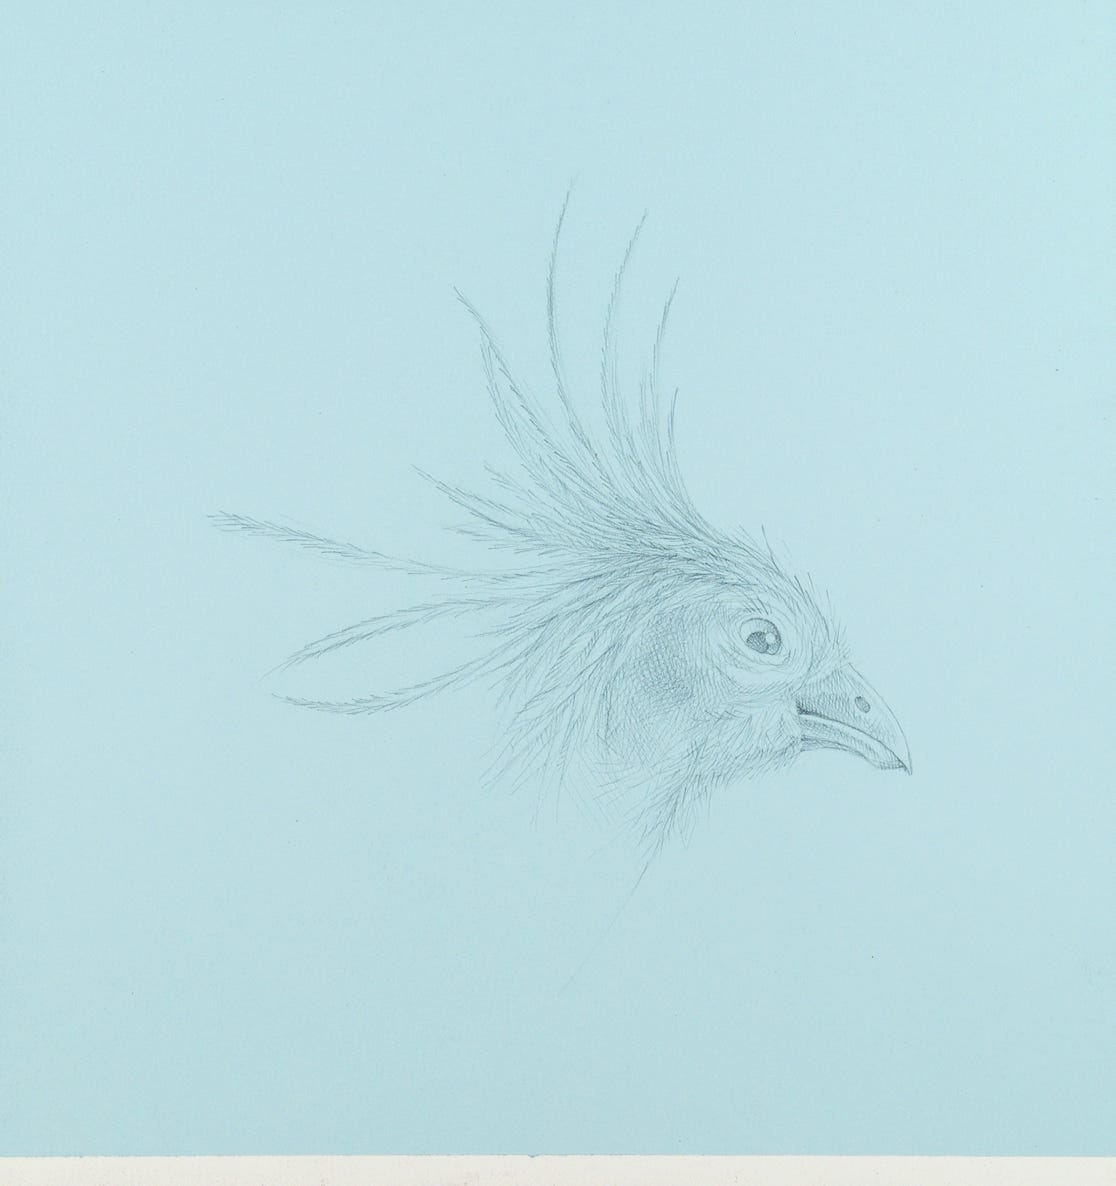 Hoatzin, 2021, silverpoint on prepared paper, 8 1/2 x 8  inches